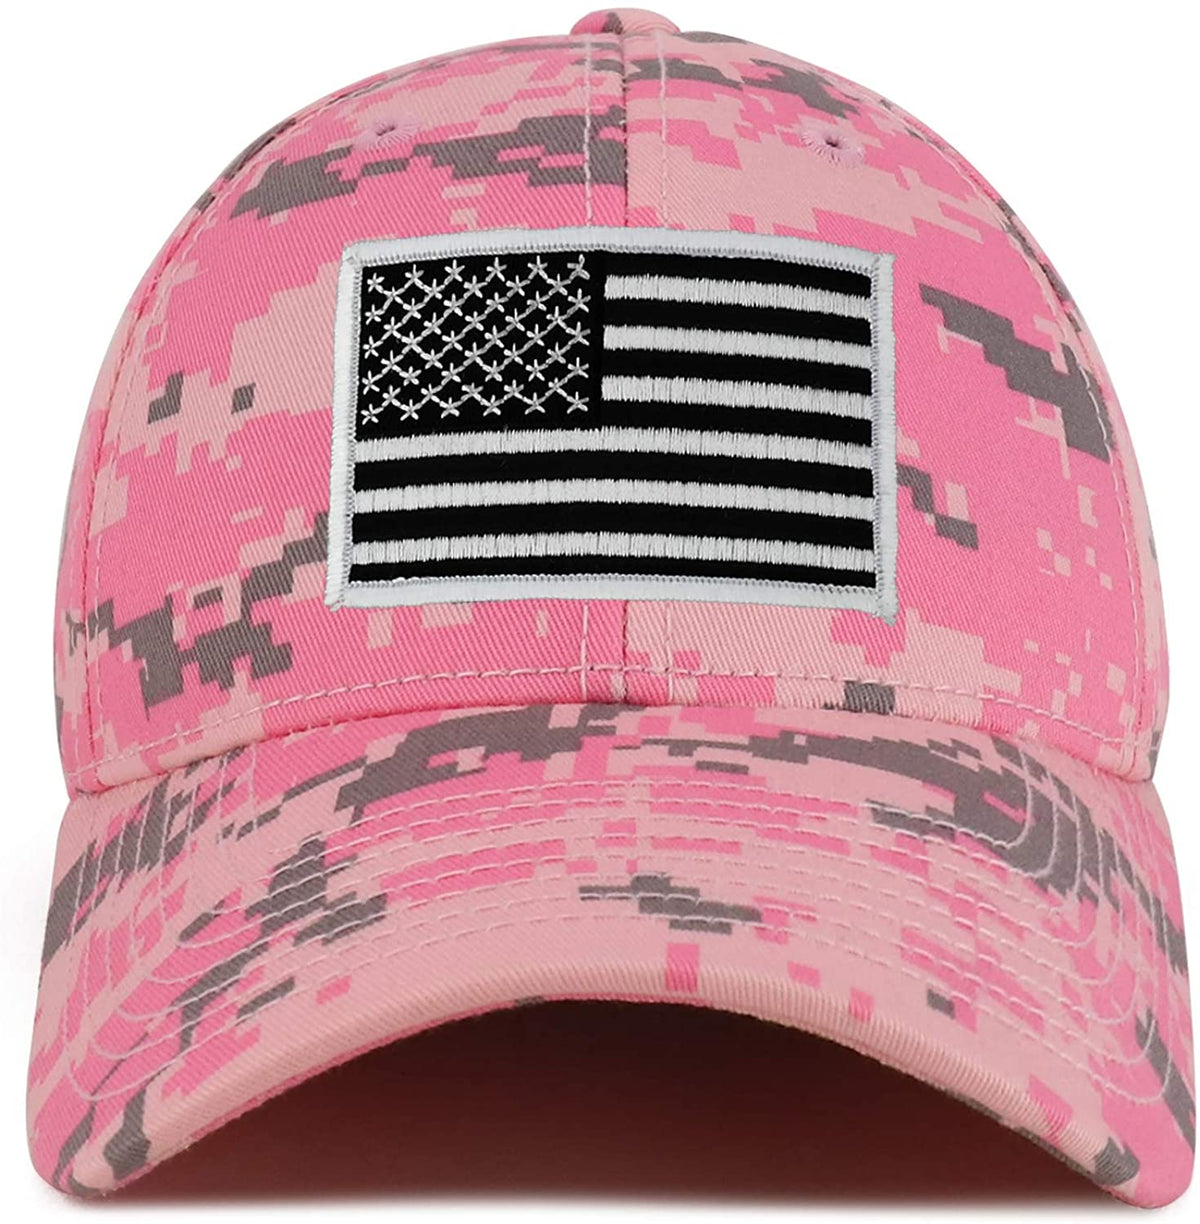 Armycrew Black White American Flag Patch Camouflage Structured Baseball Cap - PKD